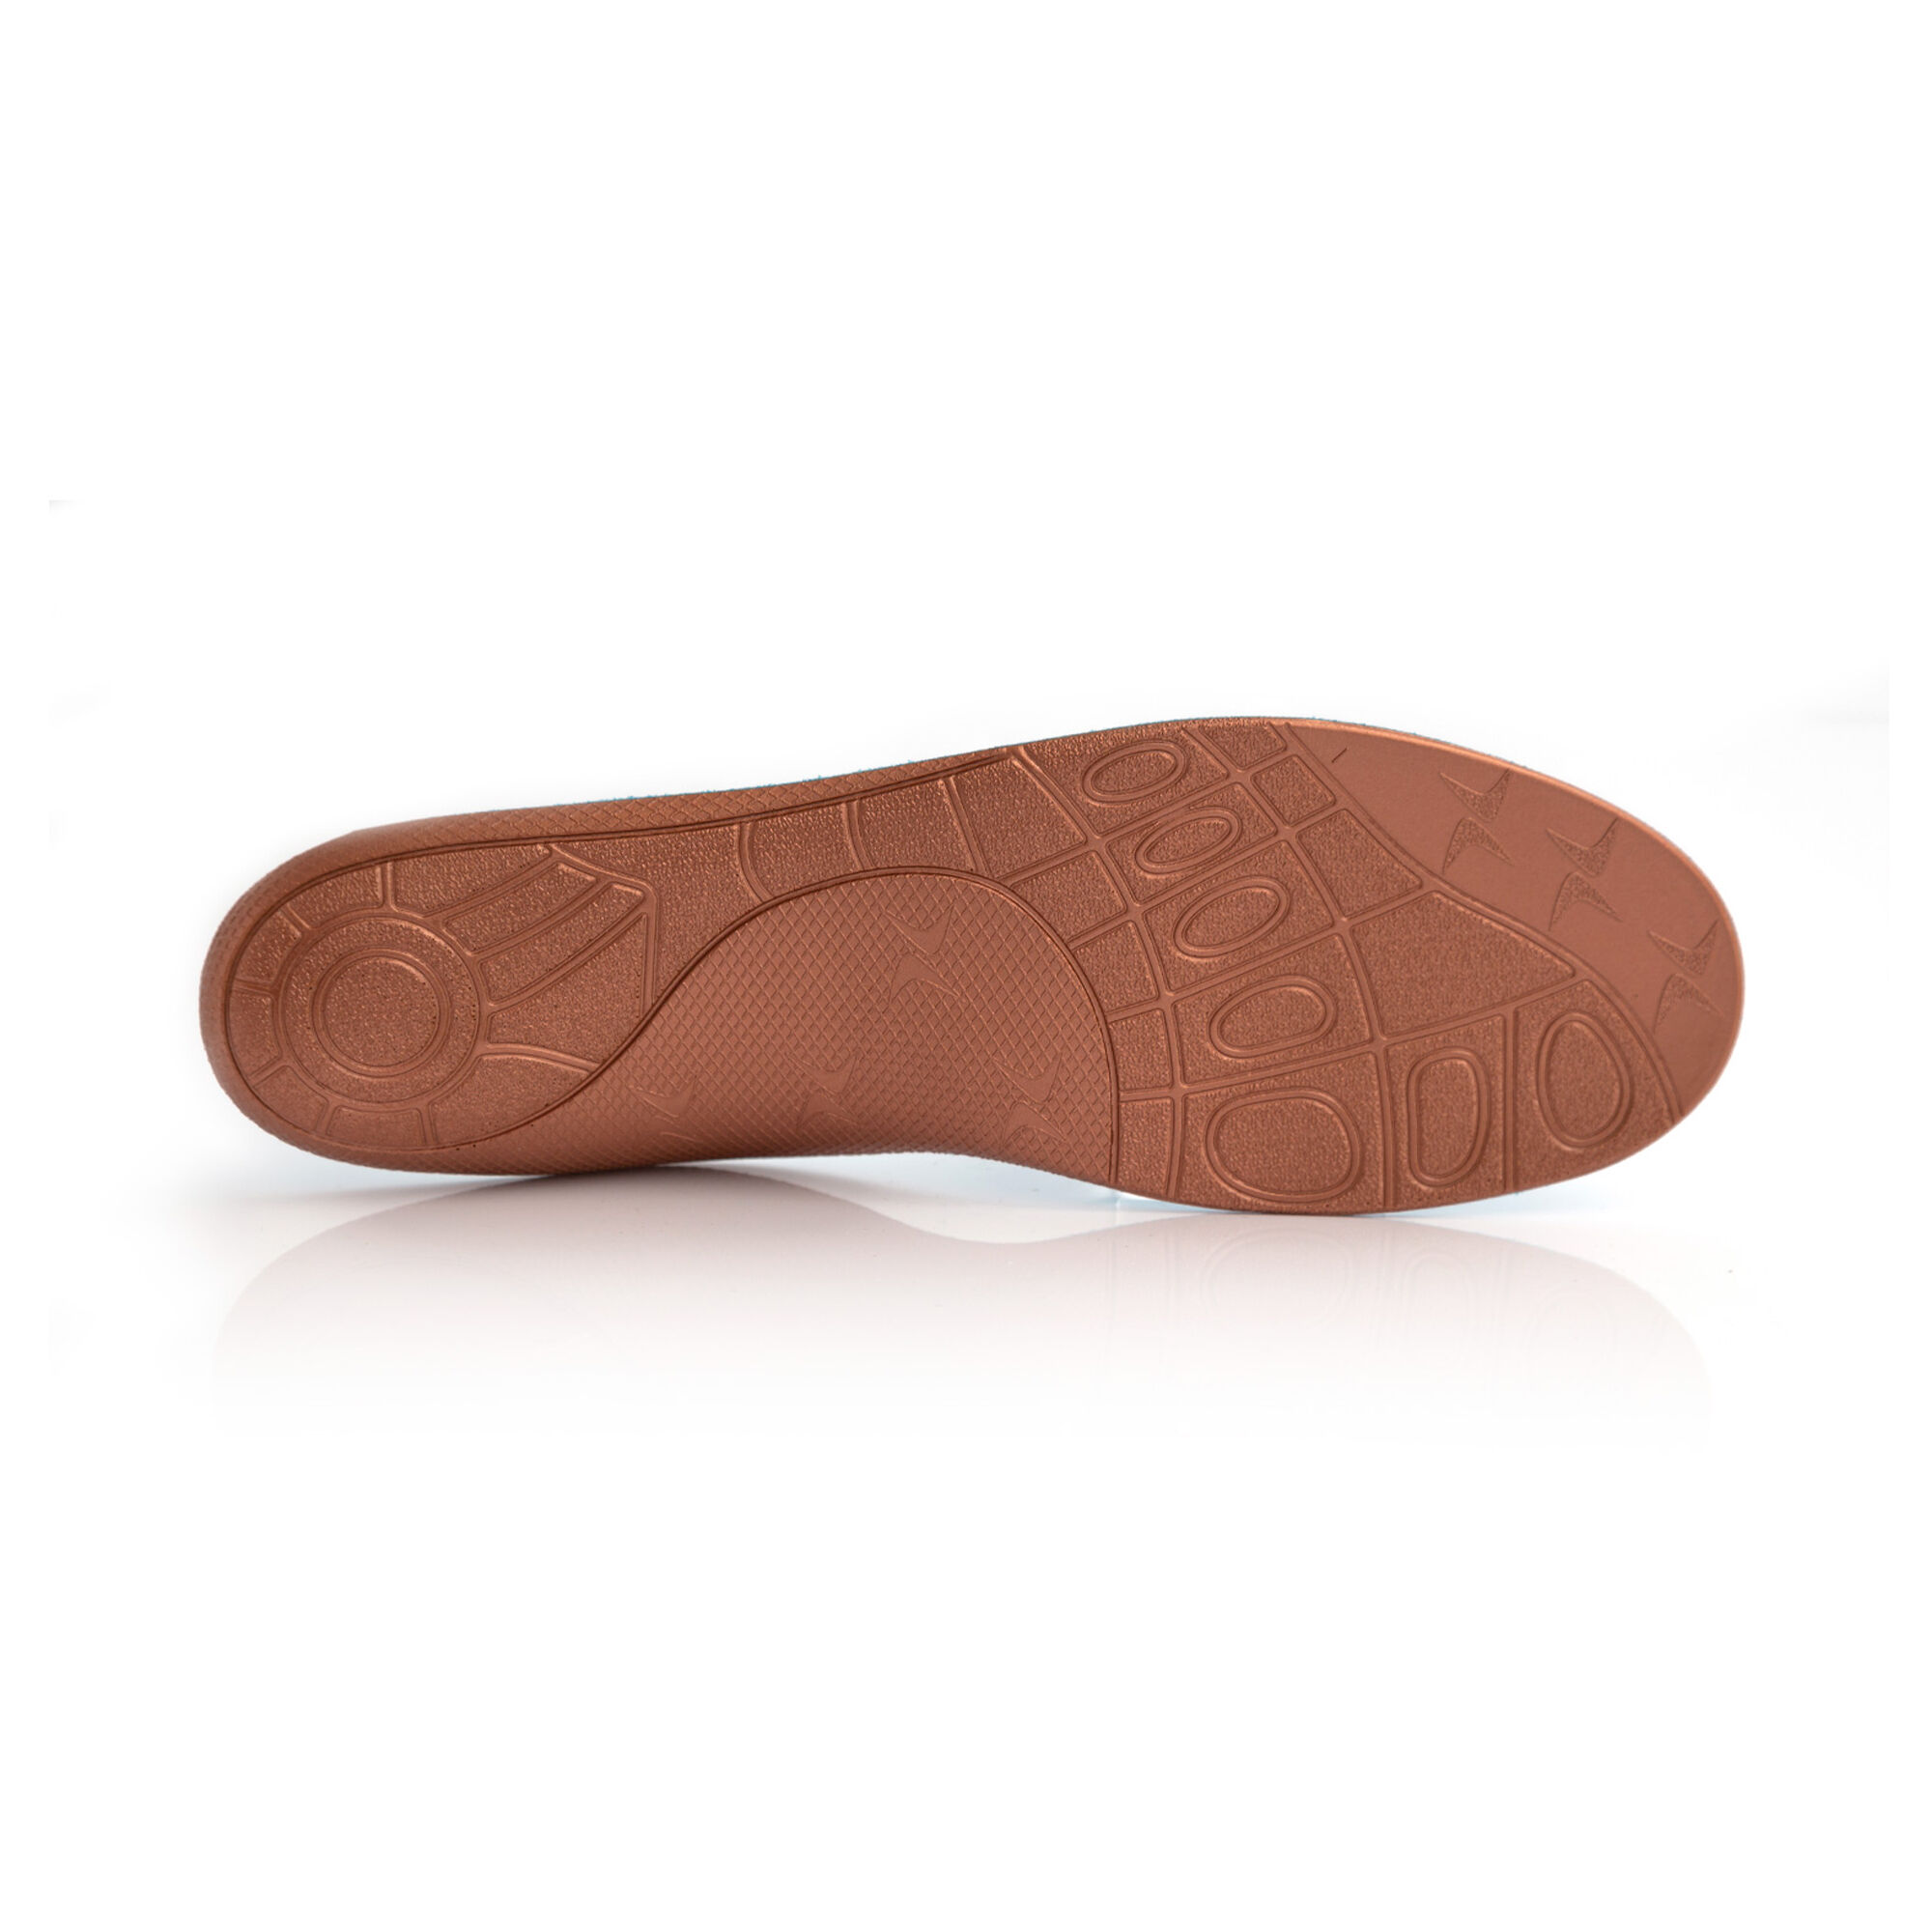 Insole for shoes without removable insoles